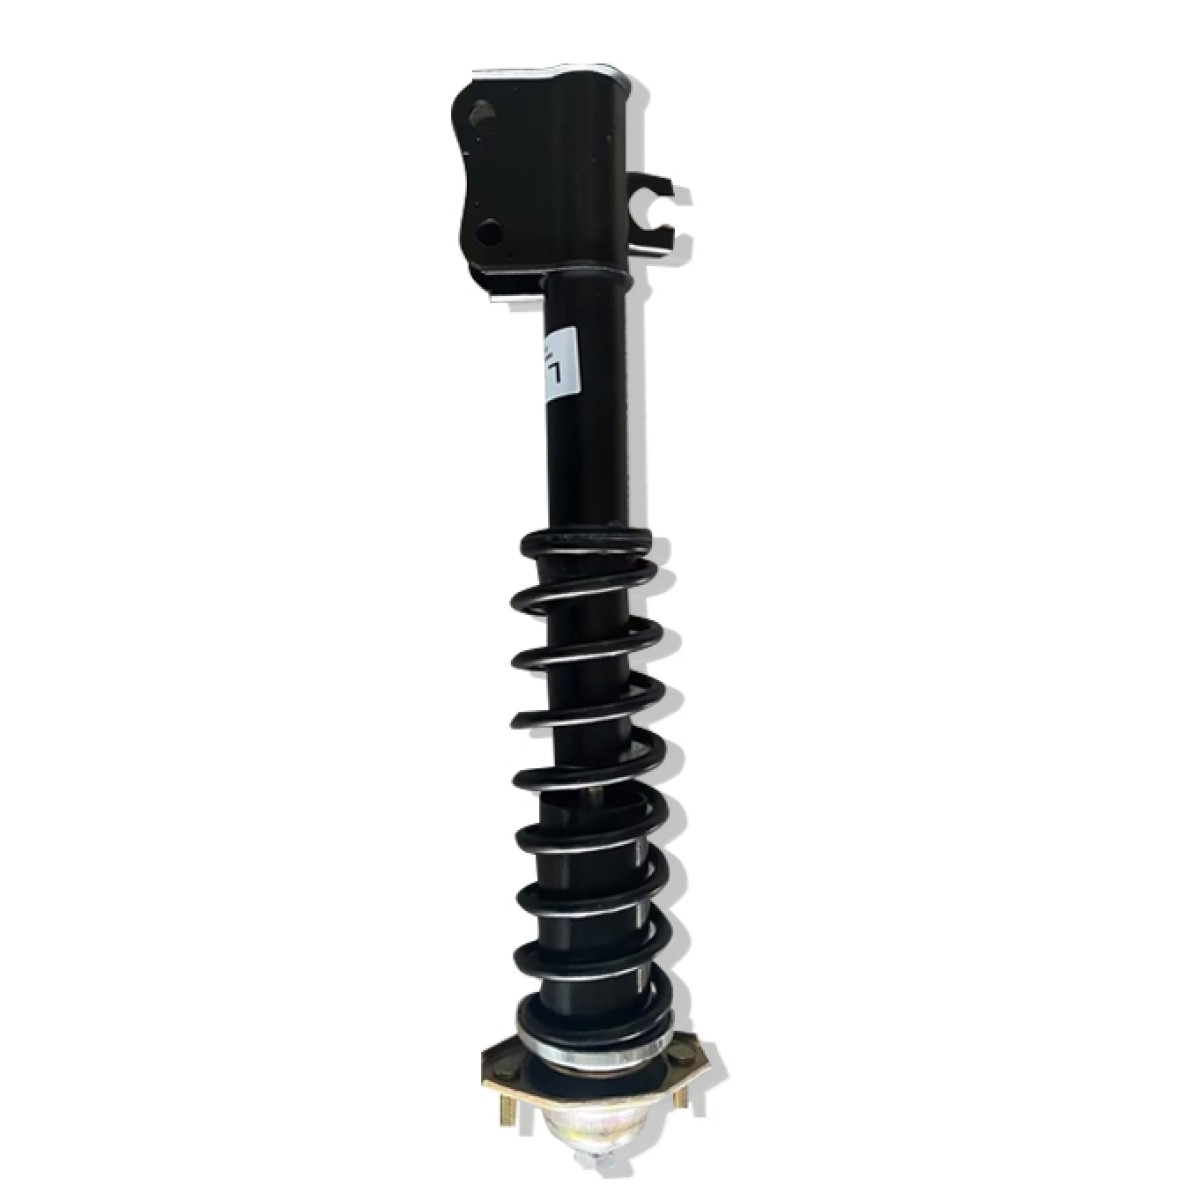 E Cabin Scooter Electric Scooter Electric Cabin Scooter E Auto Spare Parts Left front shock absorber assembly For Madat XY JINPENG XY